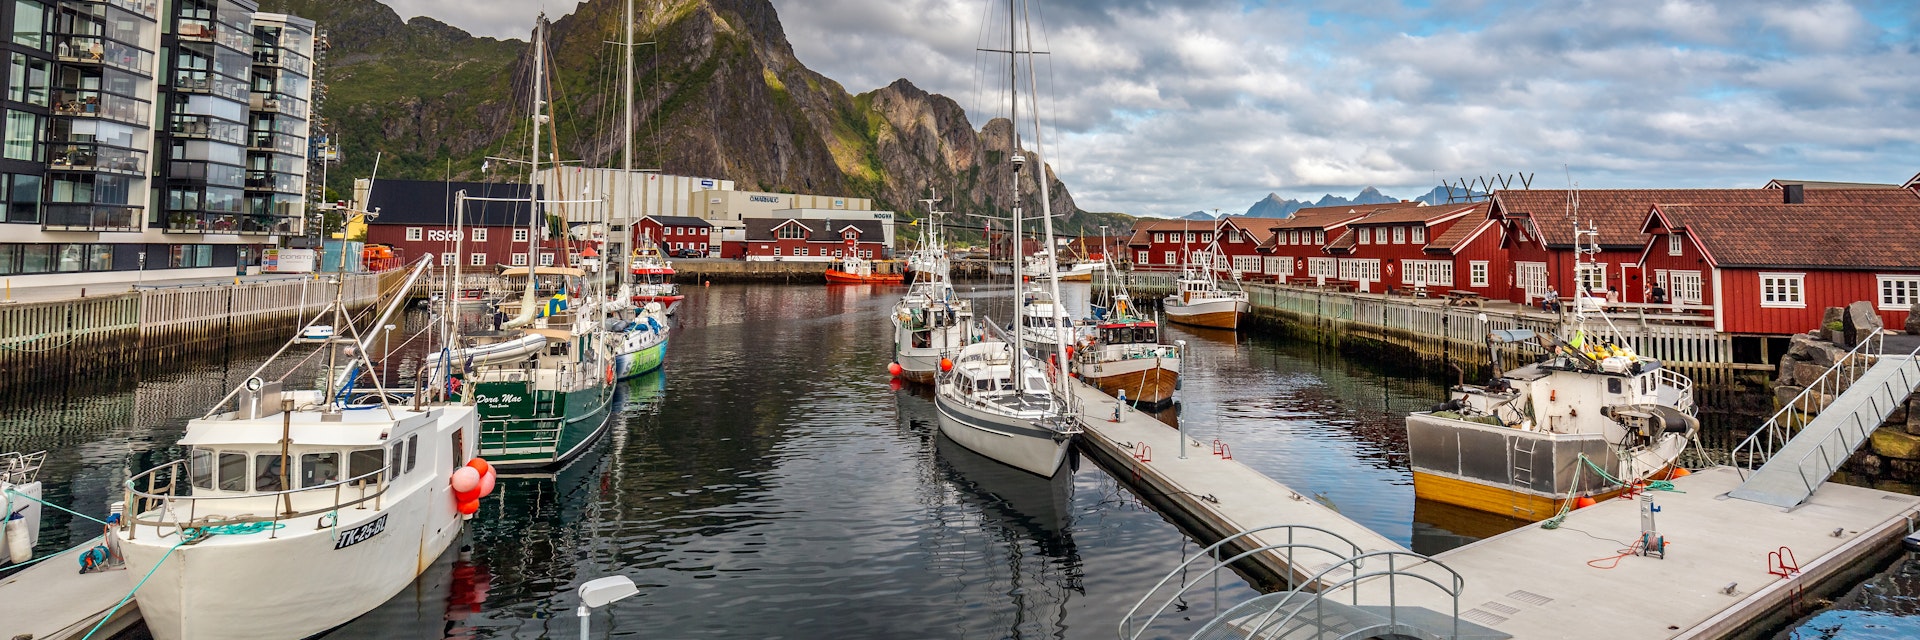 Sailing boats at Svolver is the administrative centre of Vagan Municipality in Nordland County, Norway. It is located on the island of Austvagoya in the Lofoten archipelago, along the Vestfjorden. Svolver, Norway - August 24 2019.